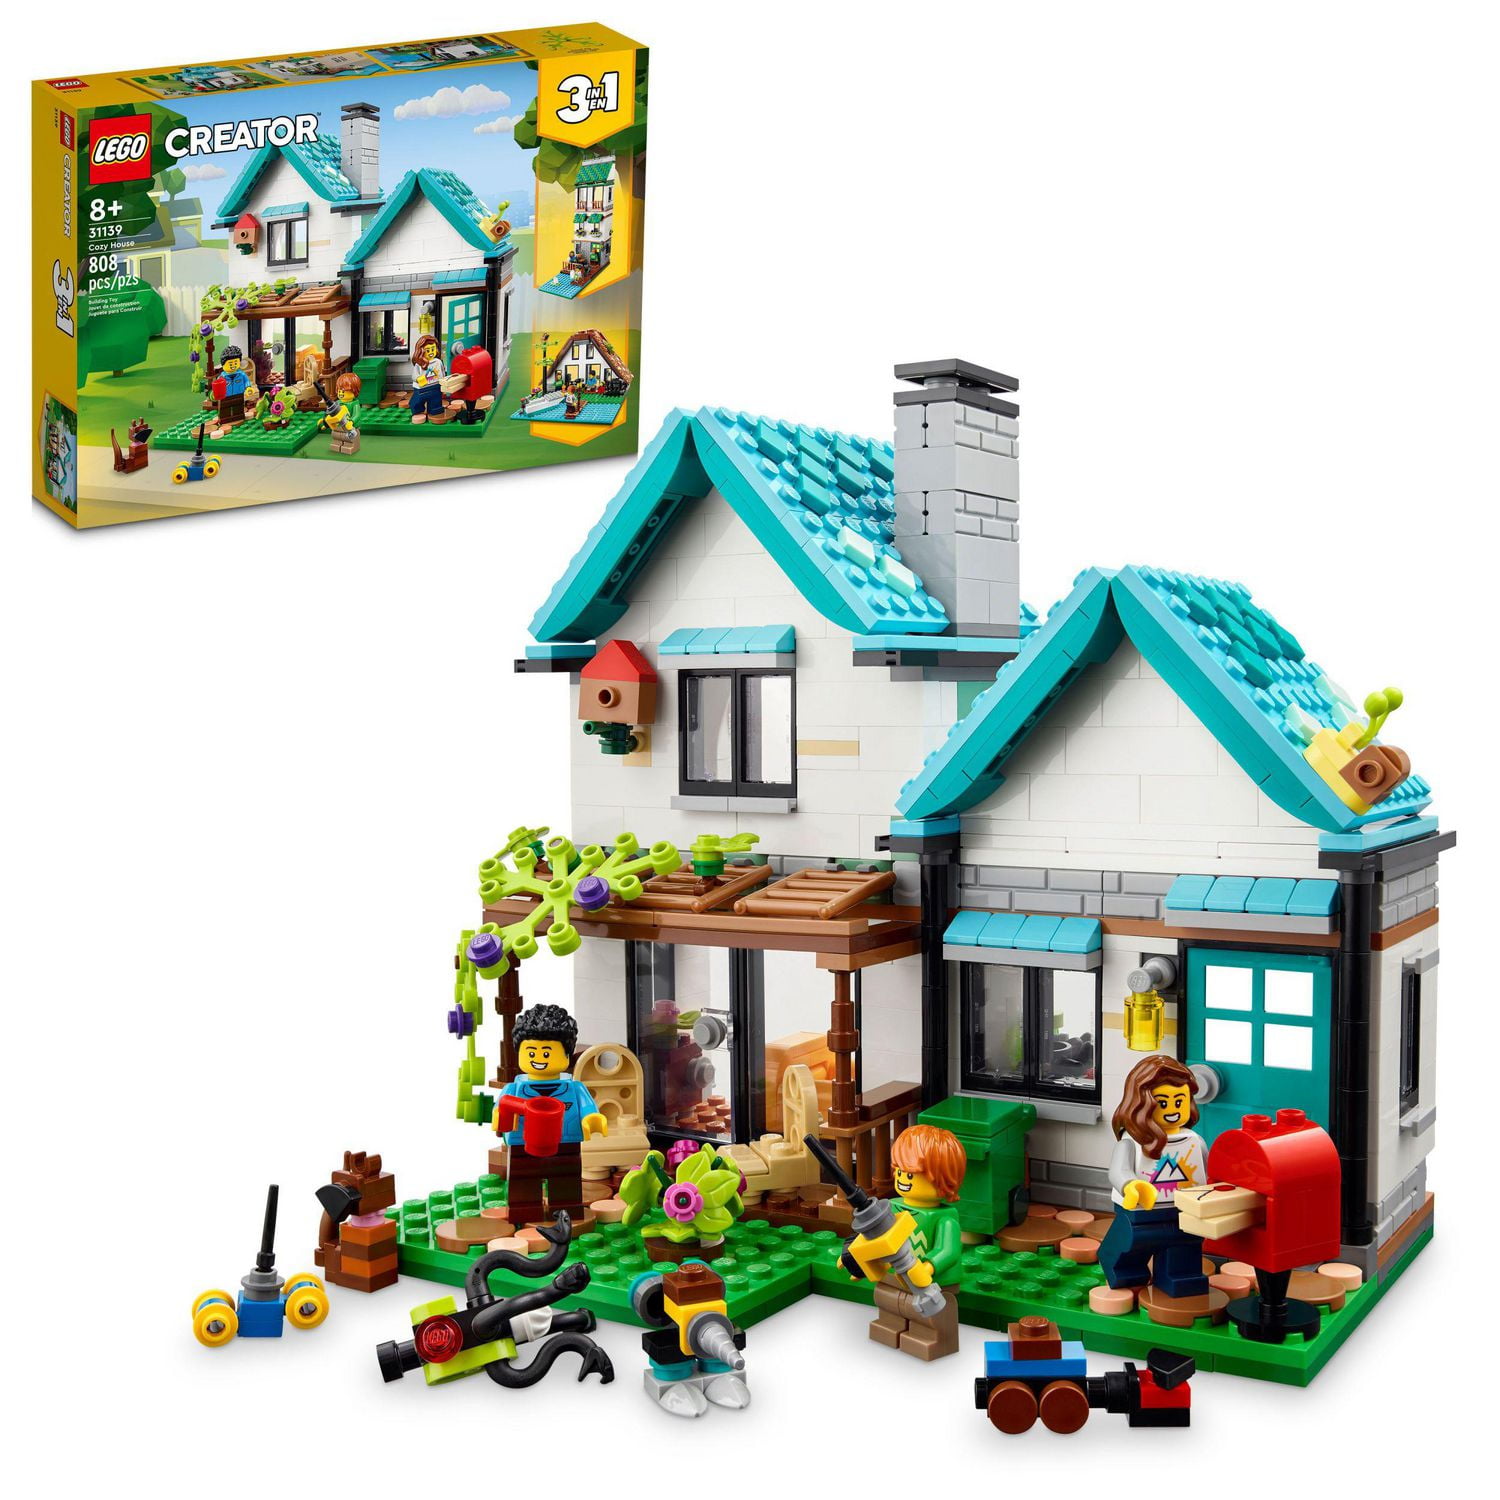 LEGO Creator 3 in 1 Cozy House Toy Set 31139, Model Building Kit with 3  Different Houses plus Family Minifigures and Accessories, Gift for Kids,  Boys and Girls, Includes 808 Pieces, Ages 8+ 